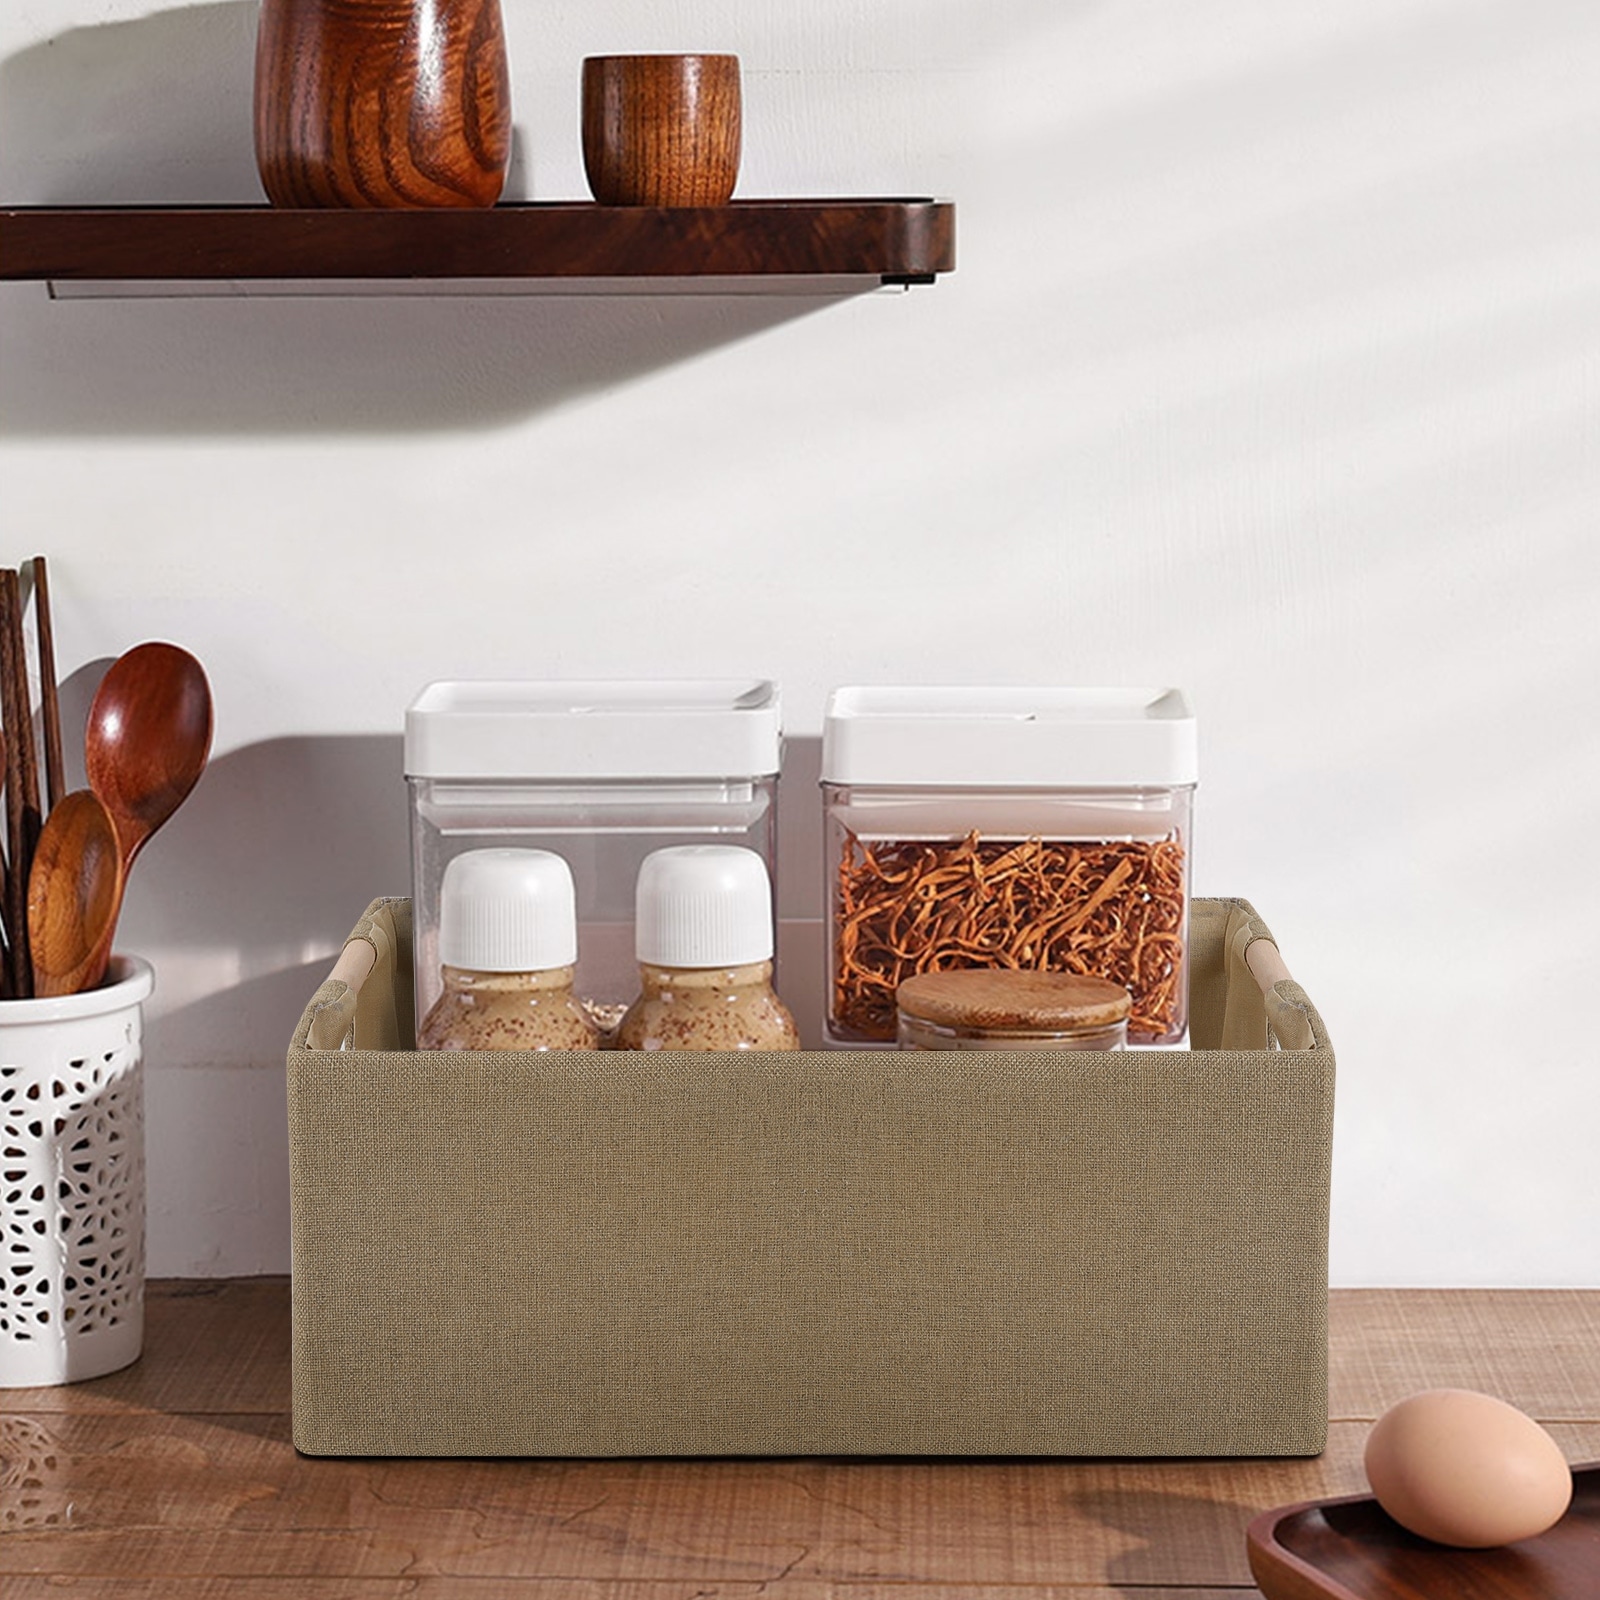 https://ak1.ostkcdn.com/images/products/is/images/direct/b846ada4dc32357a08822a013d3b28f6b3e3062e/Fabric-Foldable-Storage-Bins-Organizer-Container-W-Wood-Handles-2Pcs.jpg